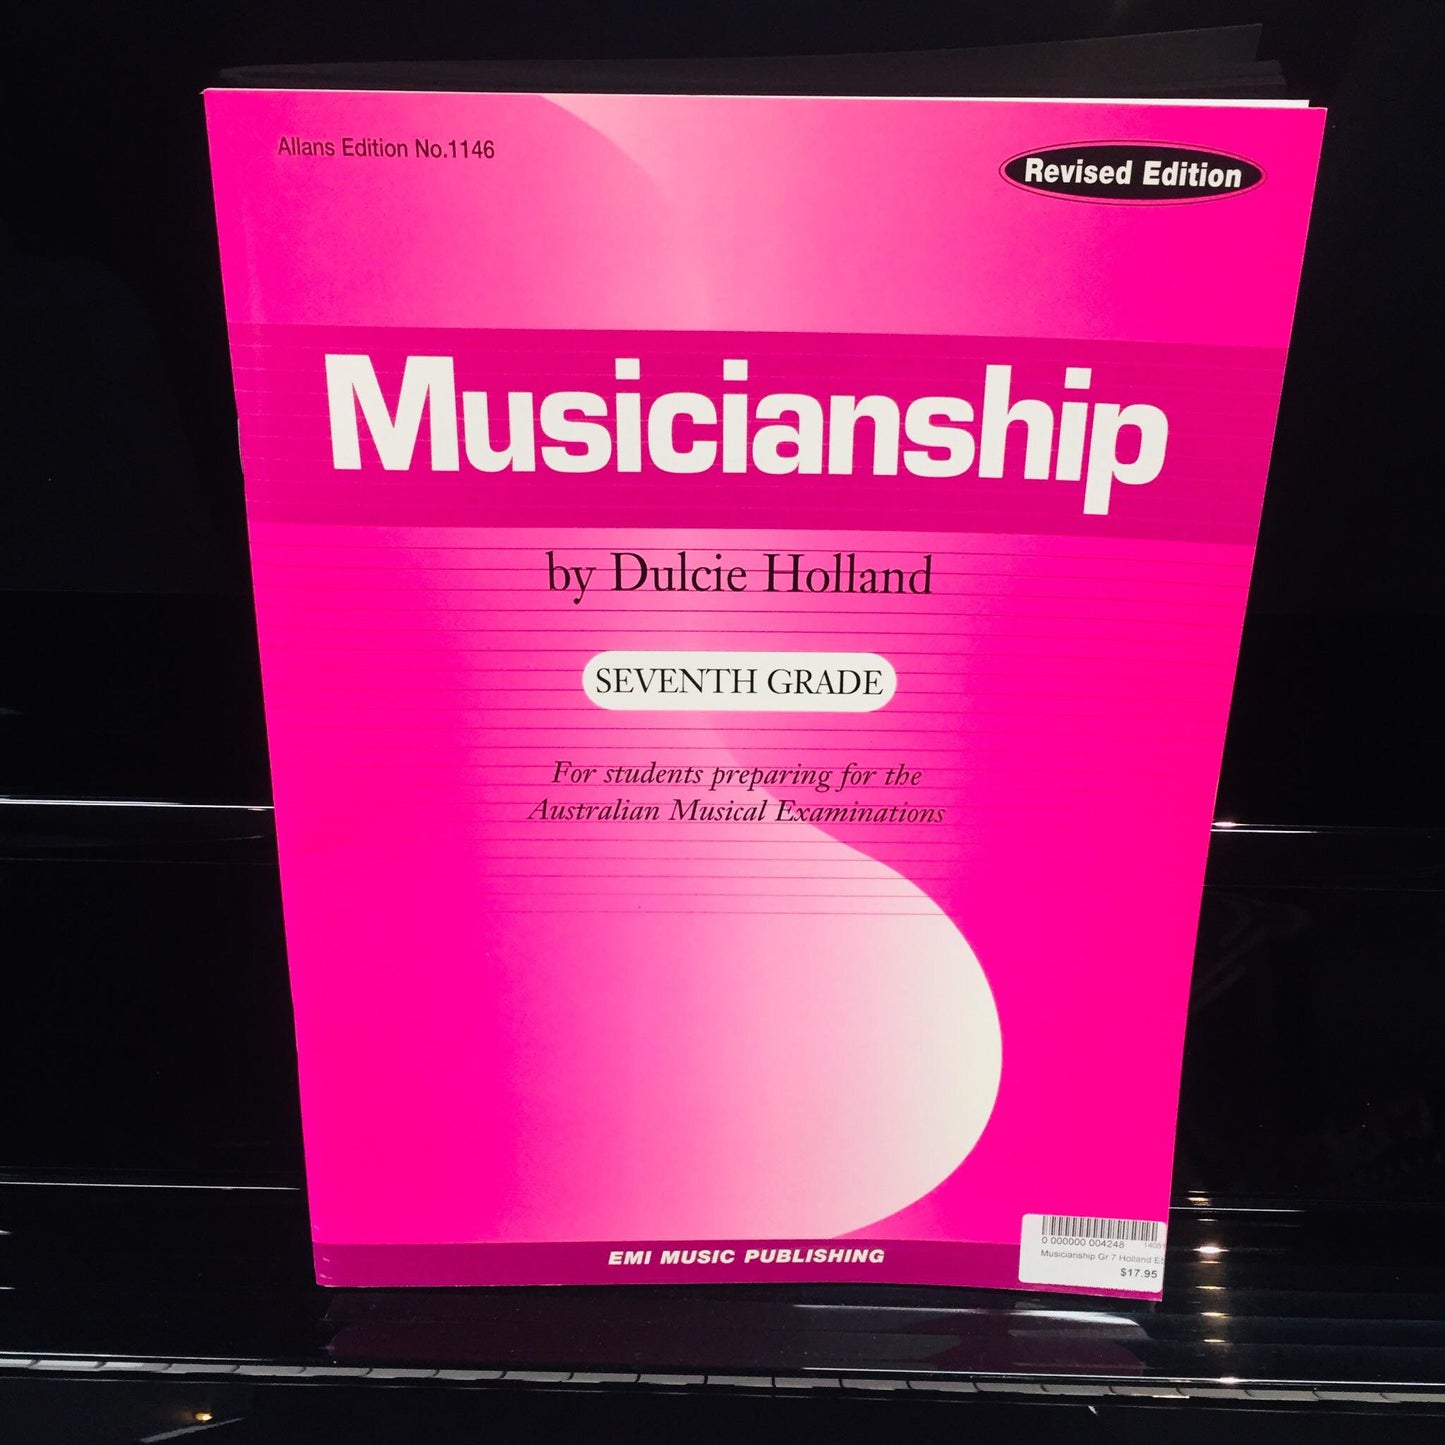 Musicianship (Revised Edition) by Dulcie Holland